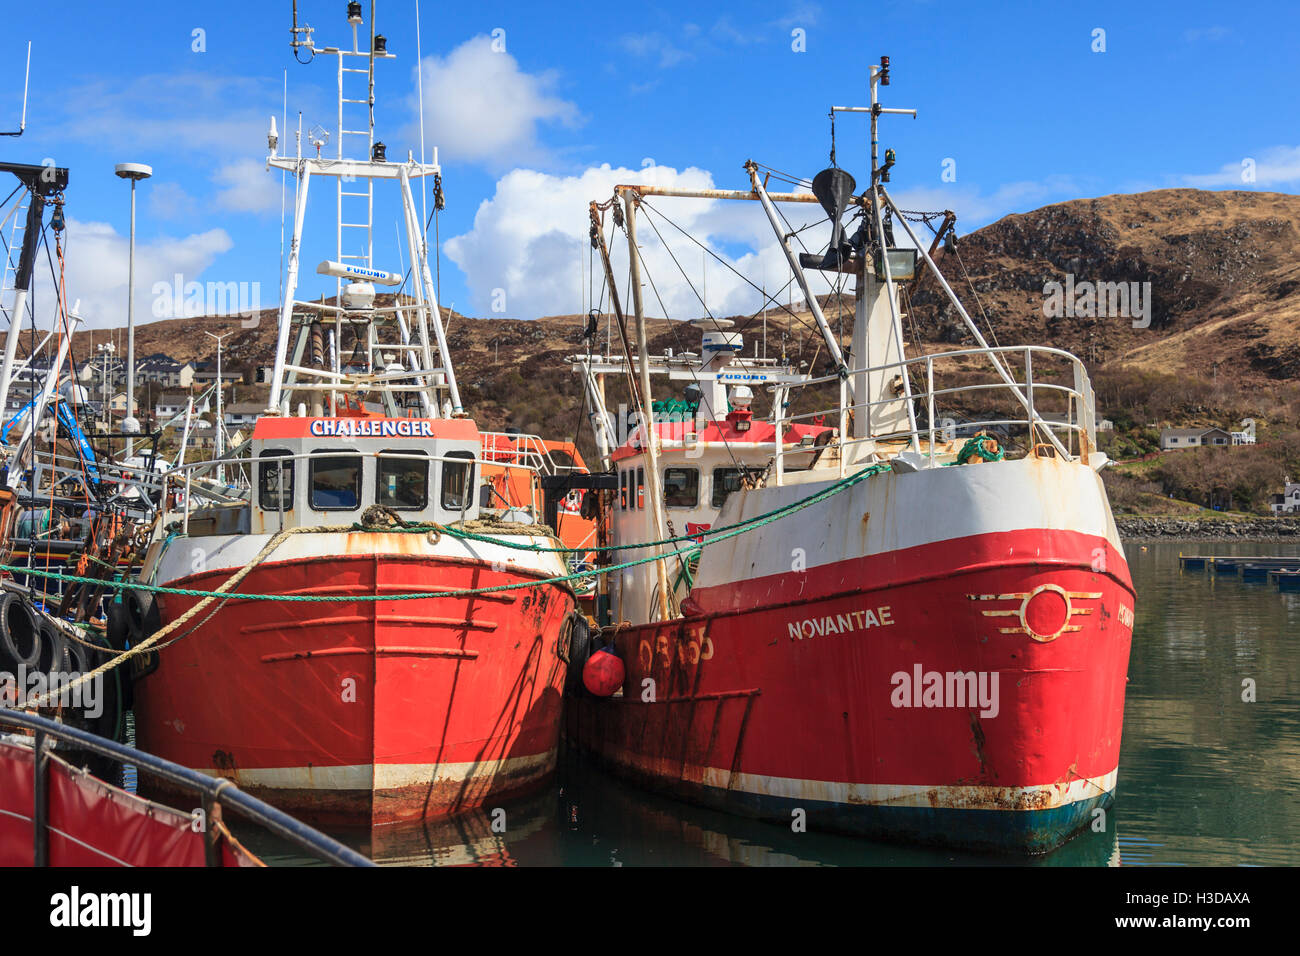 Fishing boat tied up in harbour at Mallaig Stock Photo